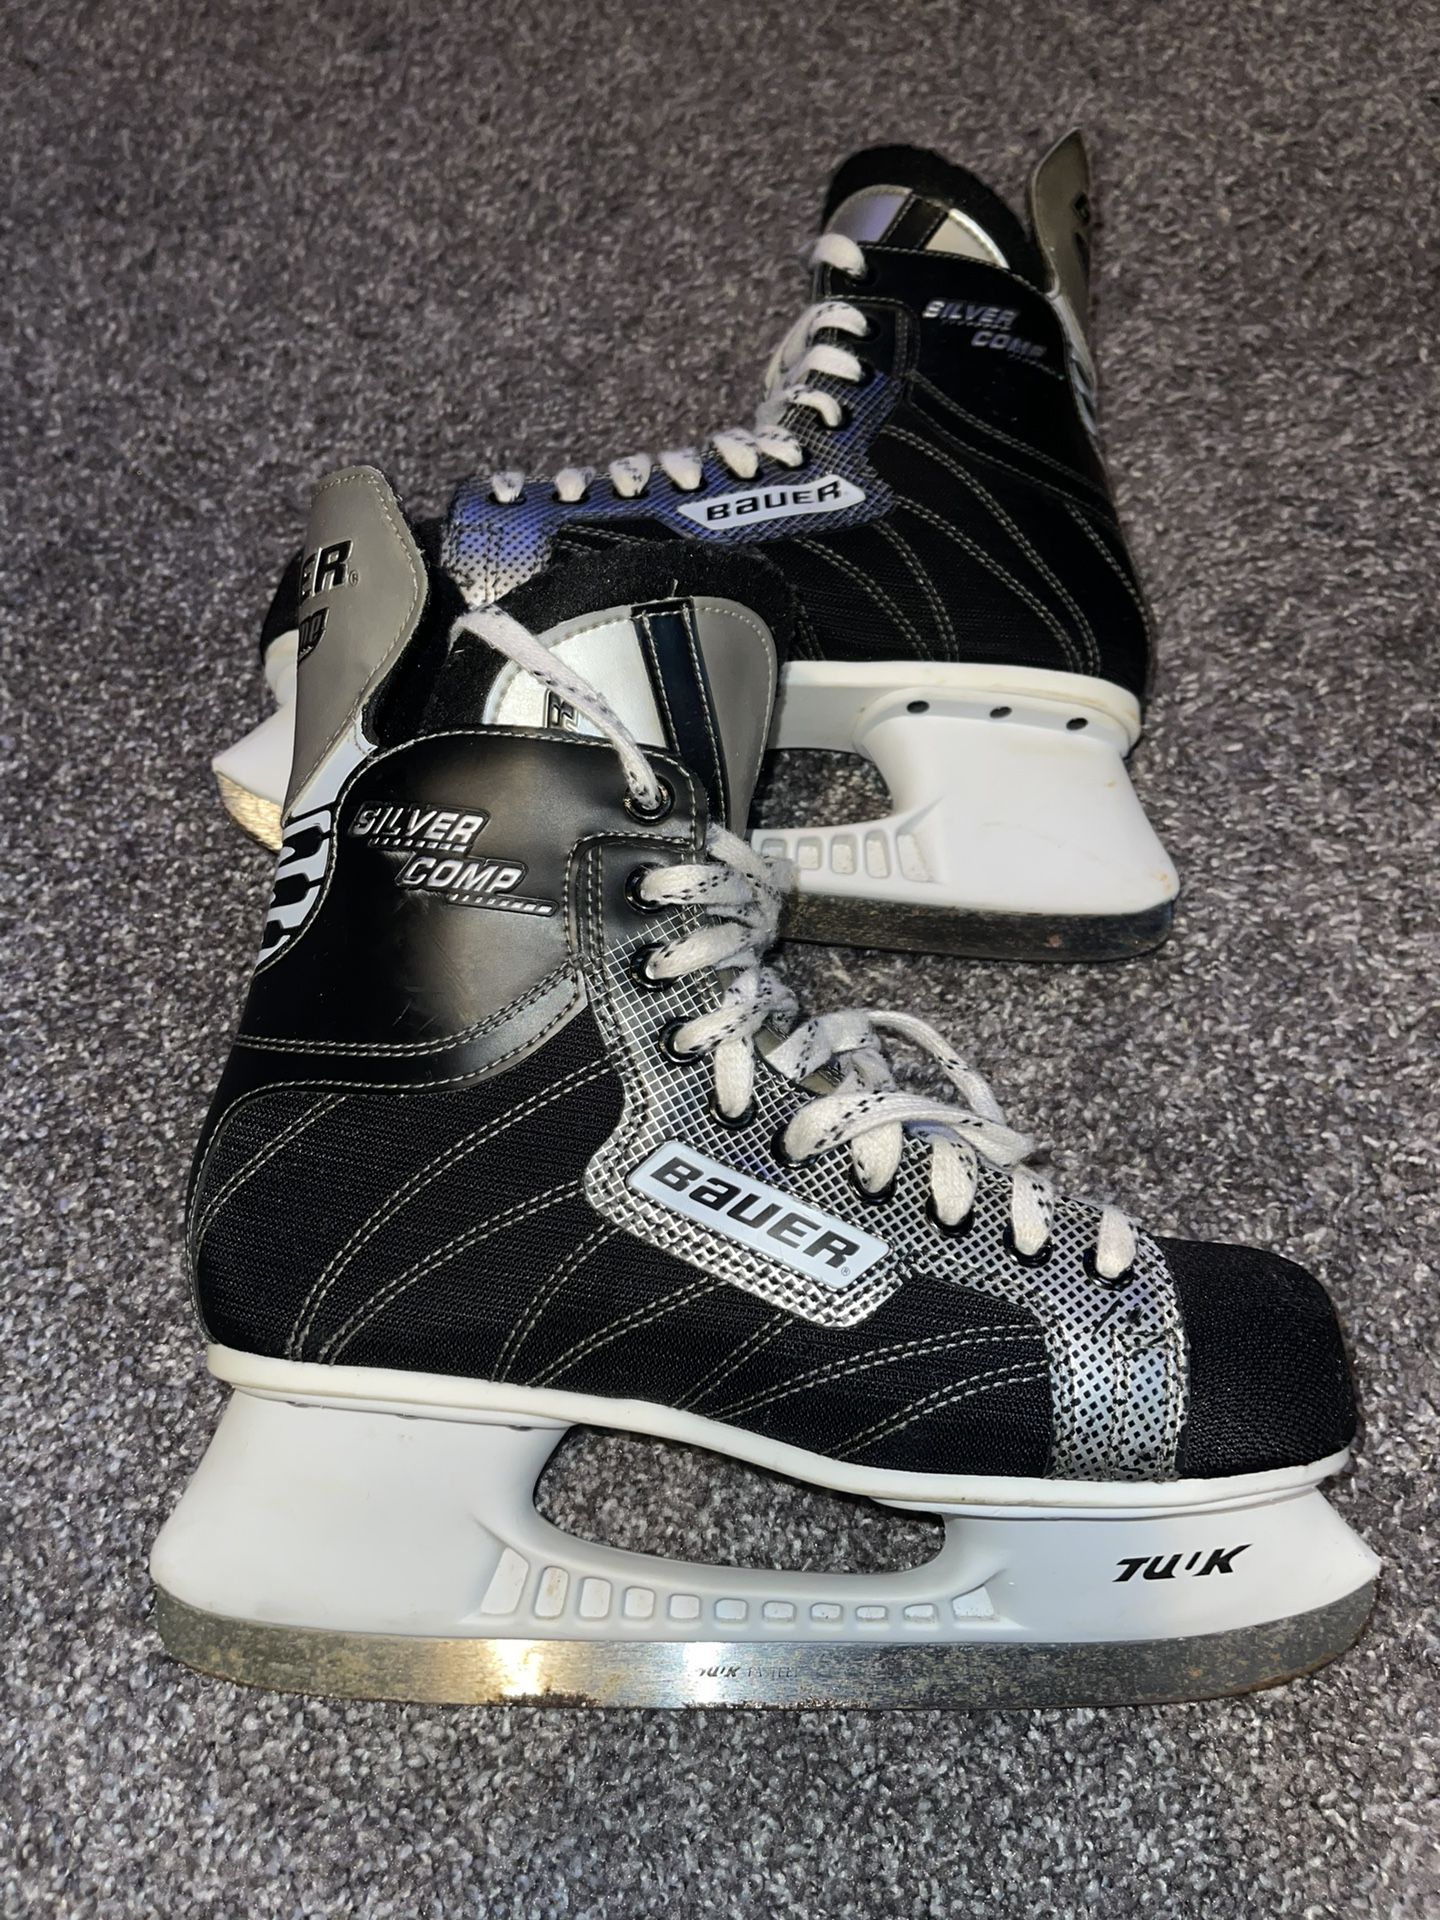 Bauer Supreme Silver Comp Ice Hockey Skates Mens Size 9.5 Used Pre Owned Gear Equipment